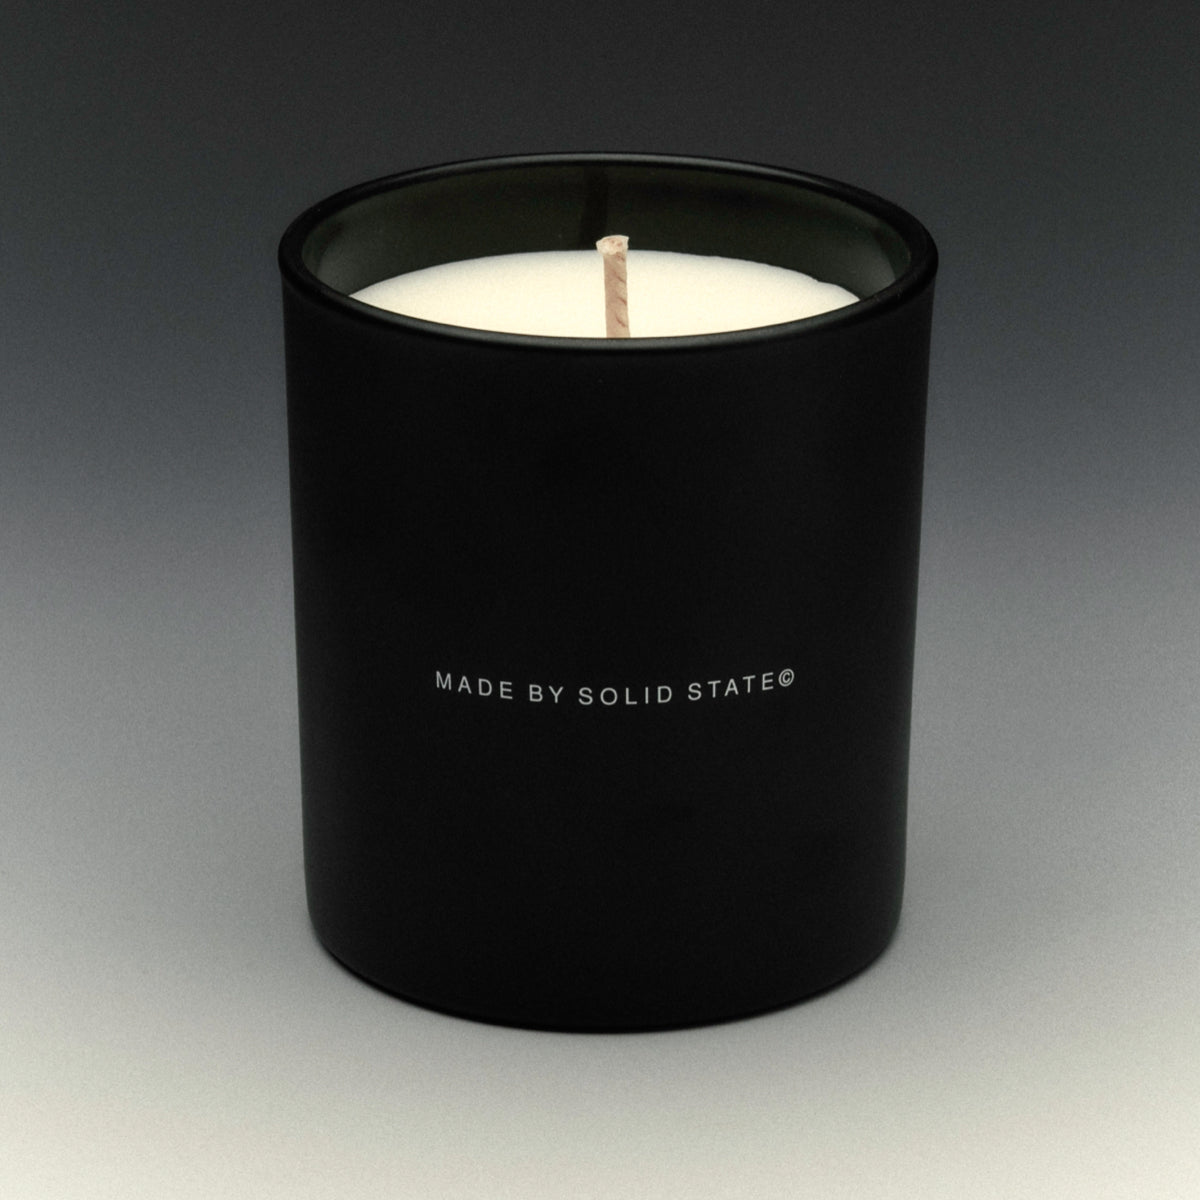 Roma Scented Candle